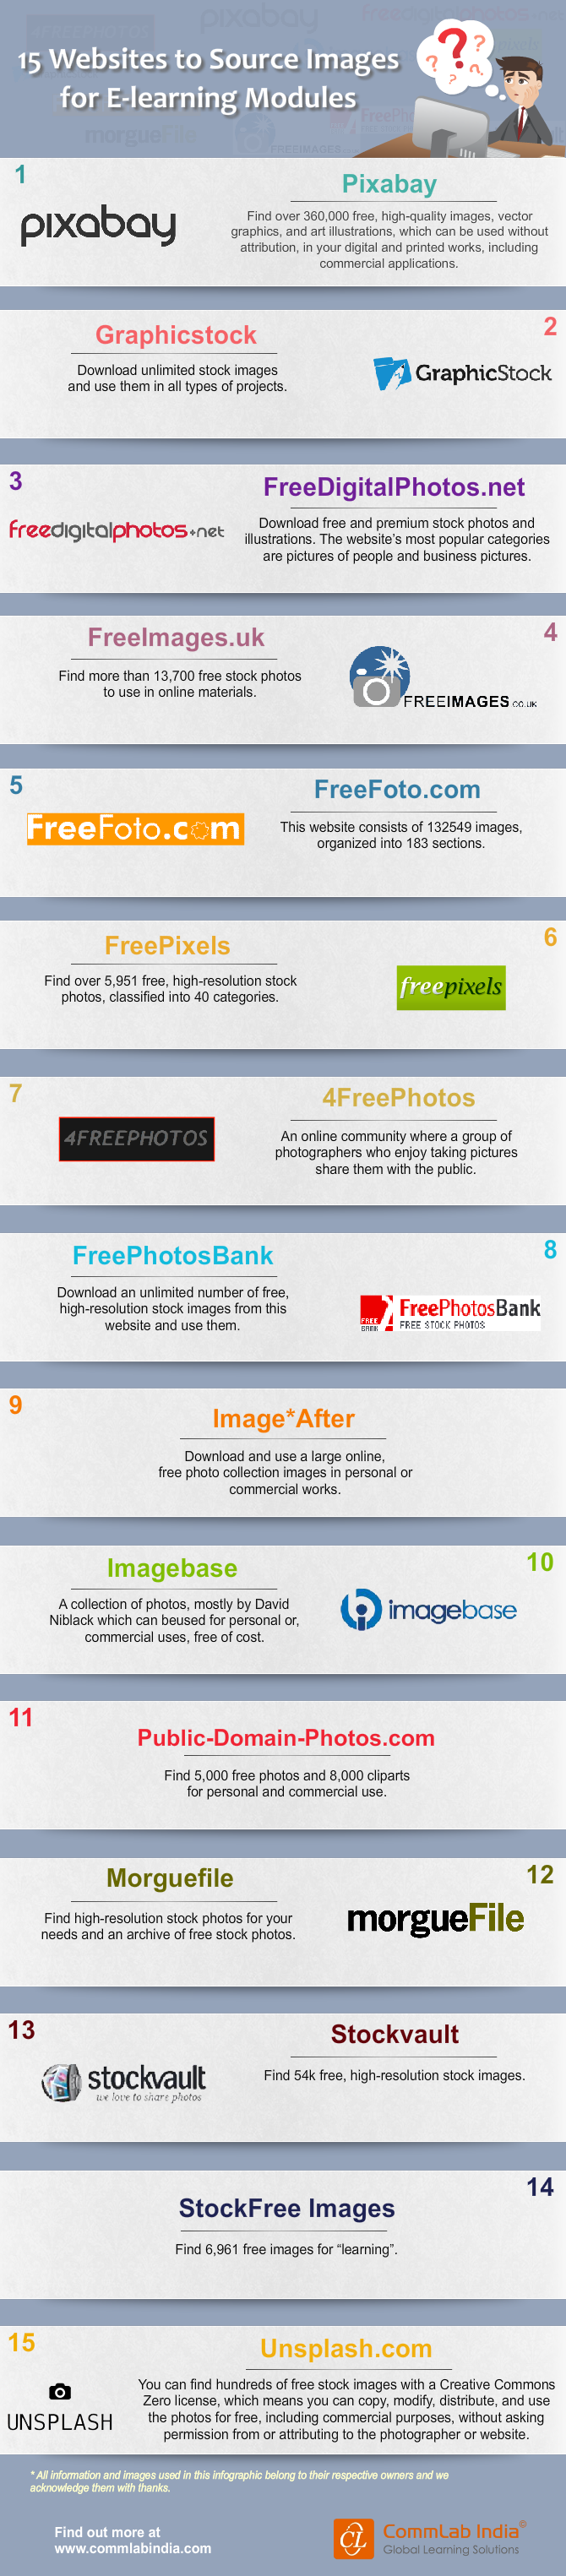 15 Websites to Source Images for E-learning Modules [Infographic]